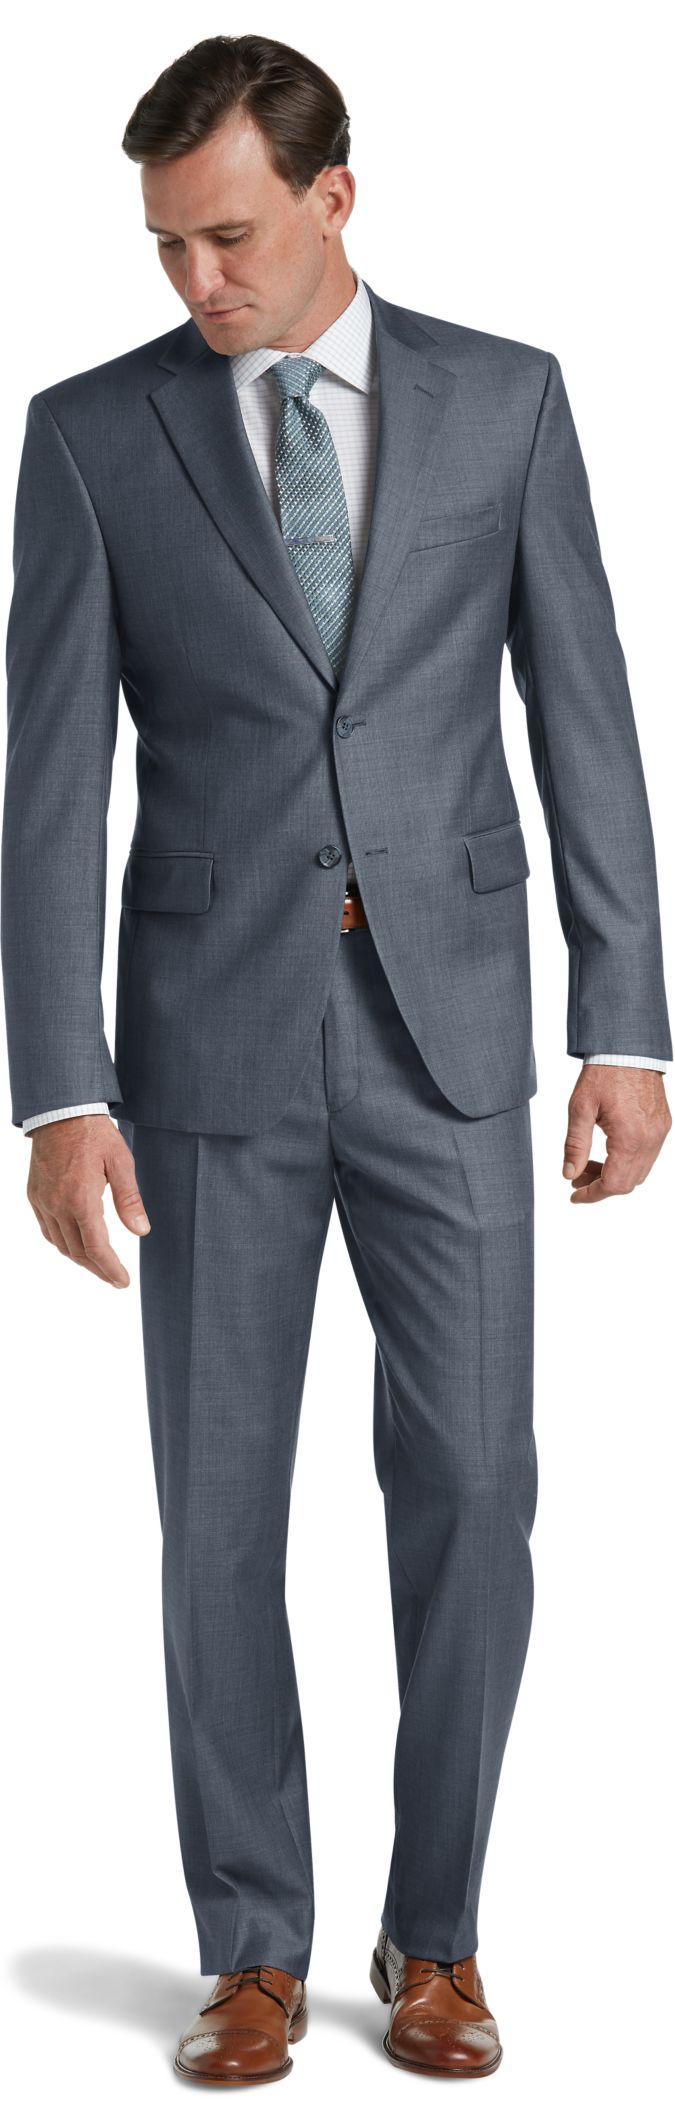 Traveler Collection Traditional Fit Sharkskin Suit - Traveler Suits ...